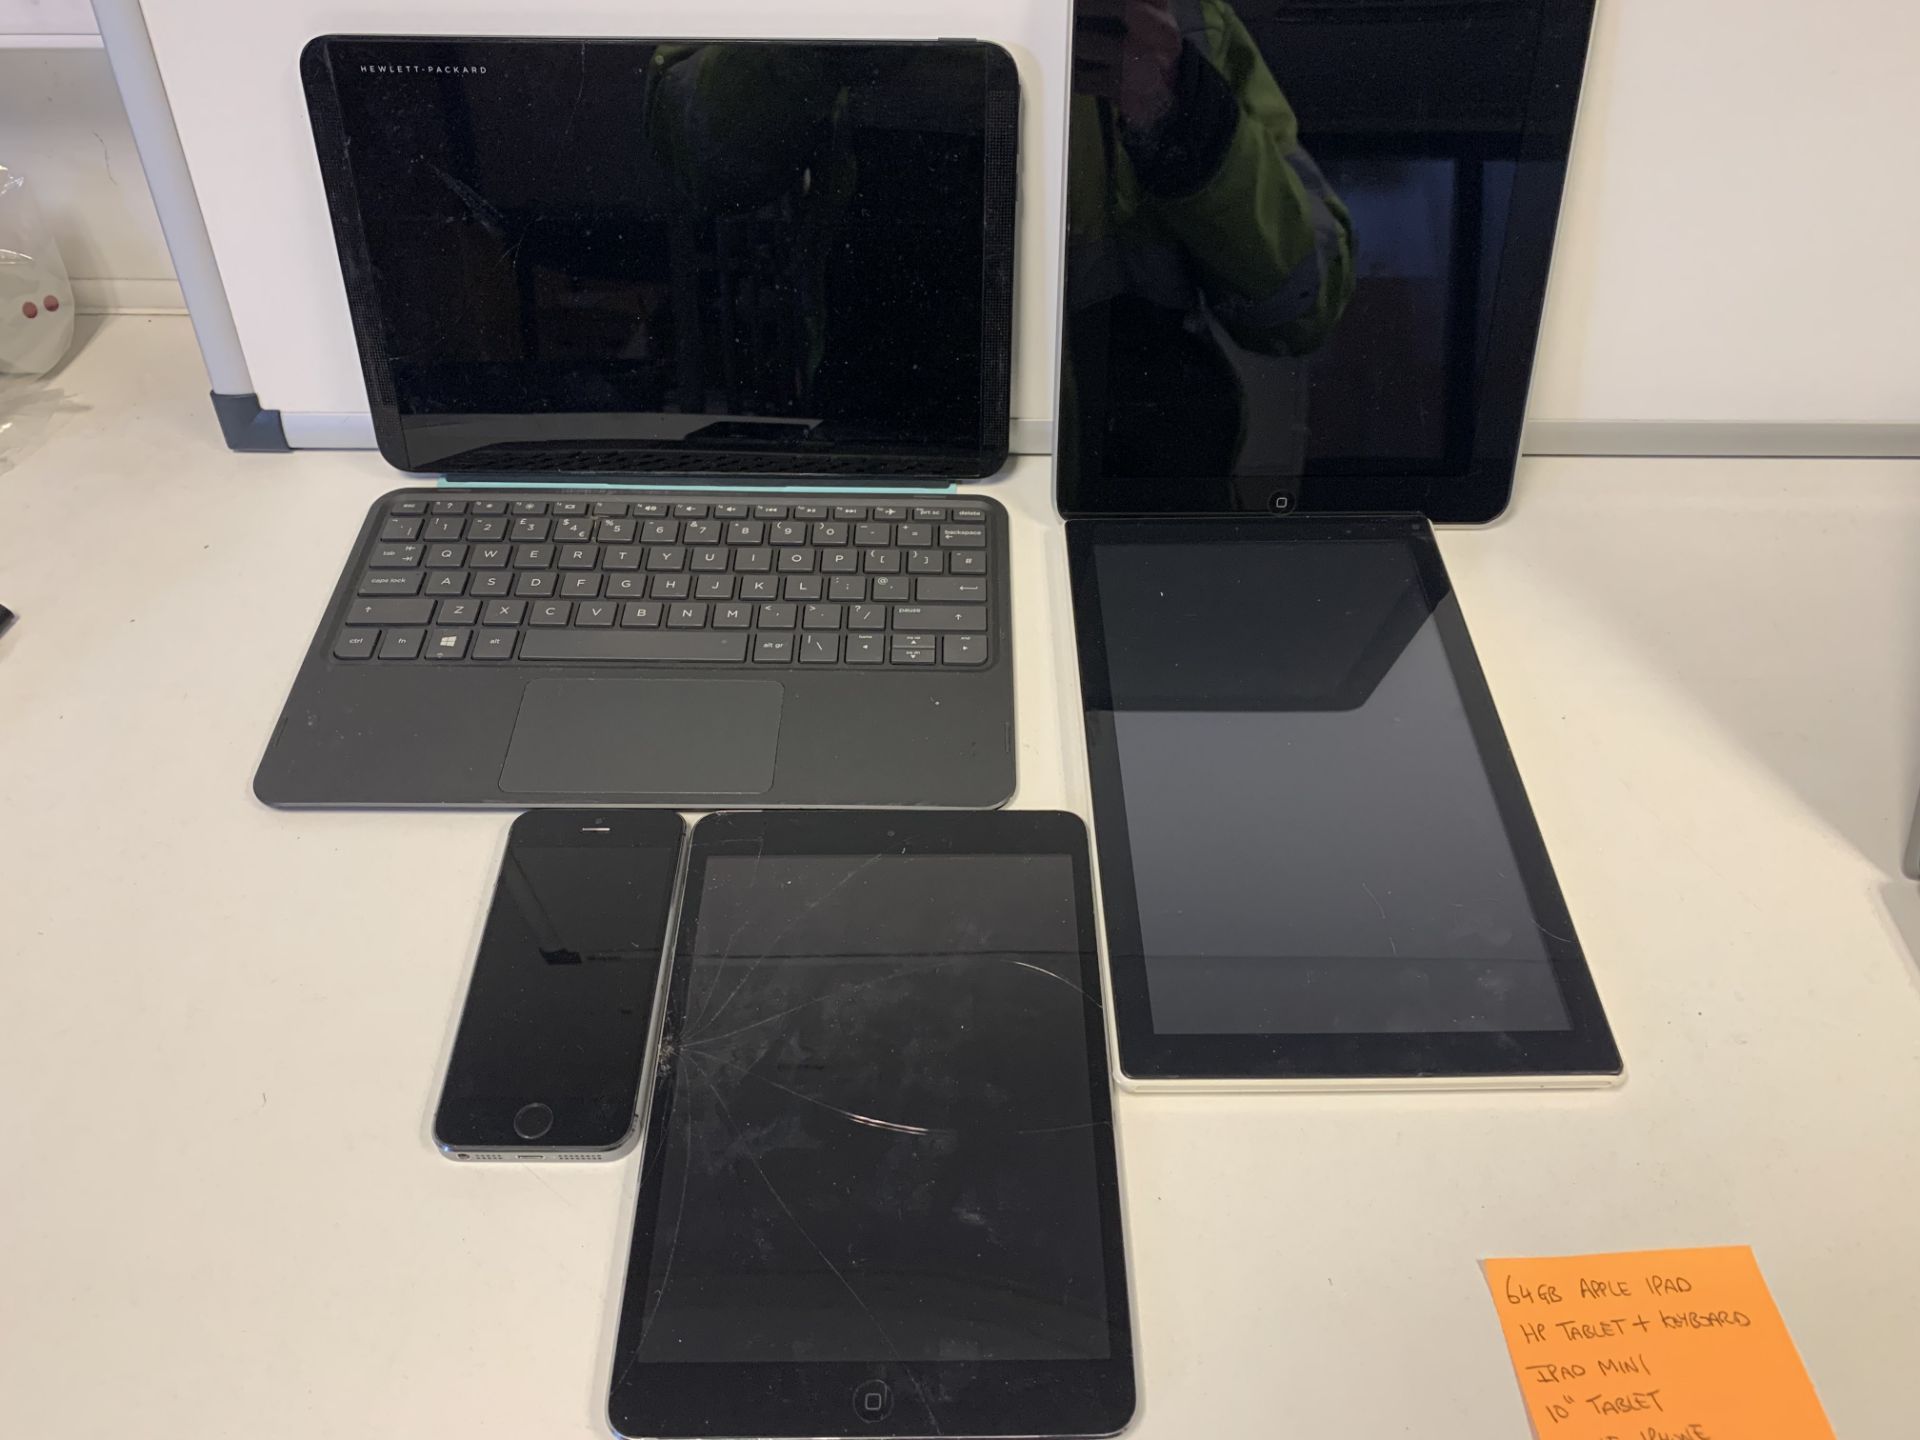 64GB APPLE IPAD, HP TABLET WITH KEYBOARD, IPAD MINI, 10 INCH TABLET, APPLE IPHONE (ALL FOR SPARES)